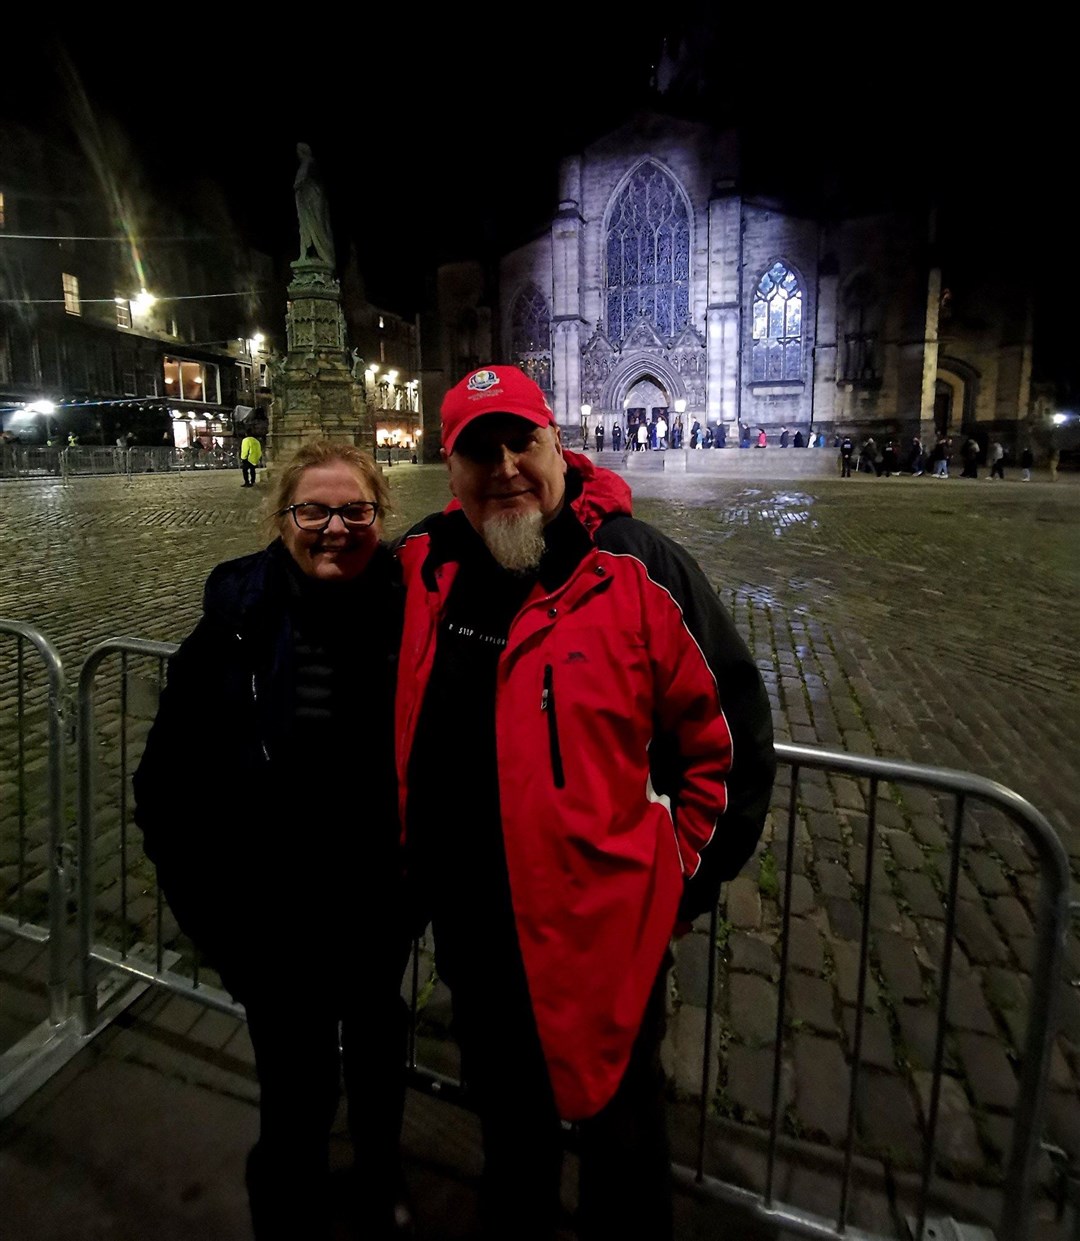 Siblings Mitch Stevenson and Moira Henderson made it into the cathedral to pay their respects to the Queen around 1am (Mitch Stevenson/PA)